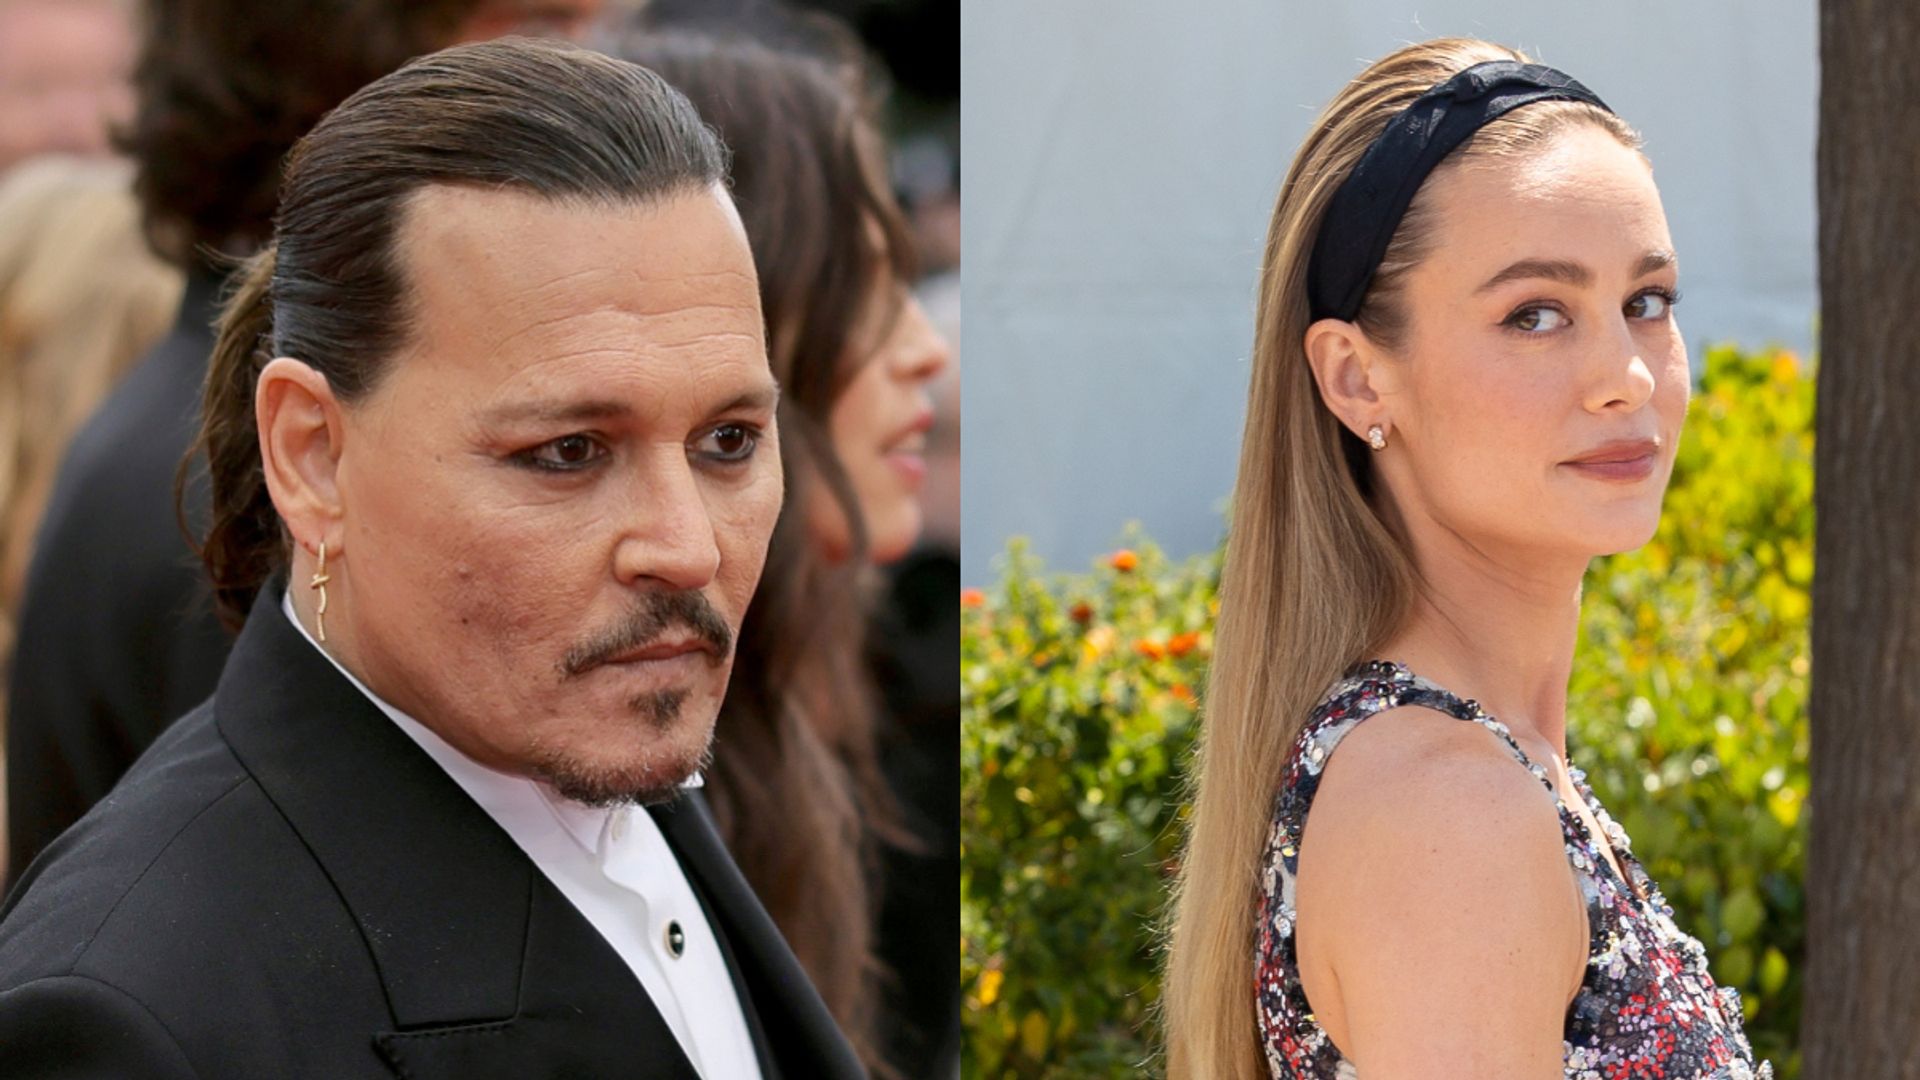 Brie Larson shades Johnny Depp's controversial Cannes return after Amber Heard trial